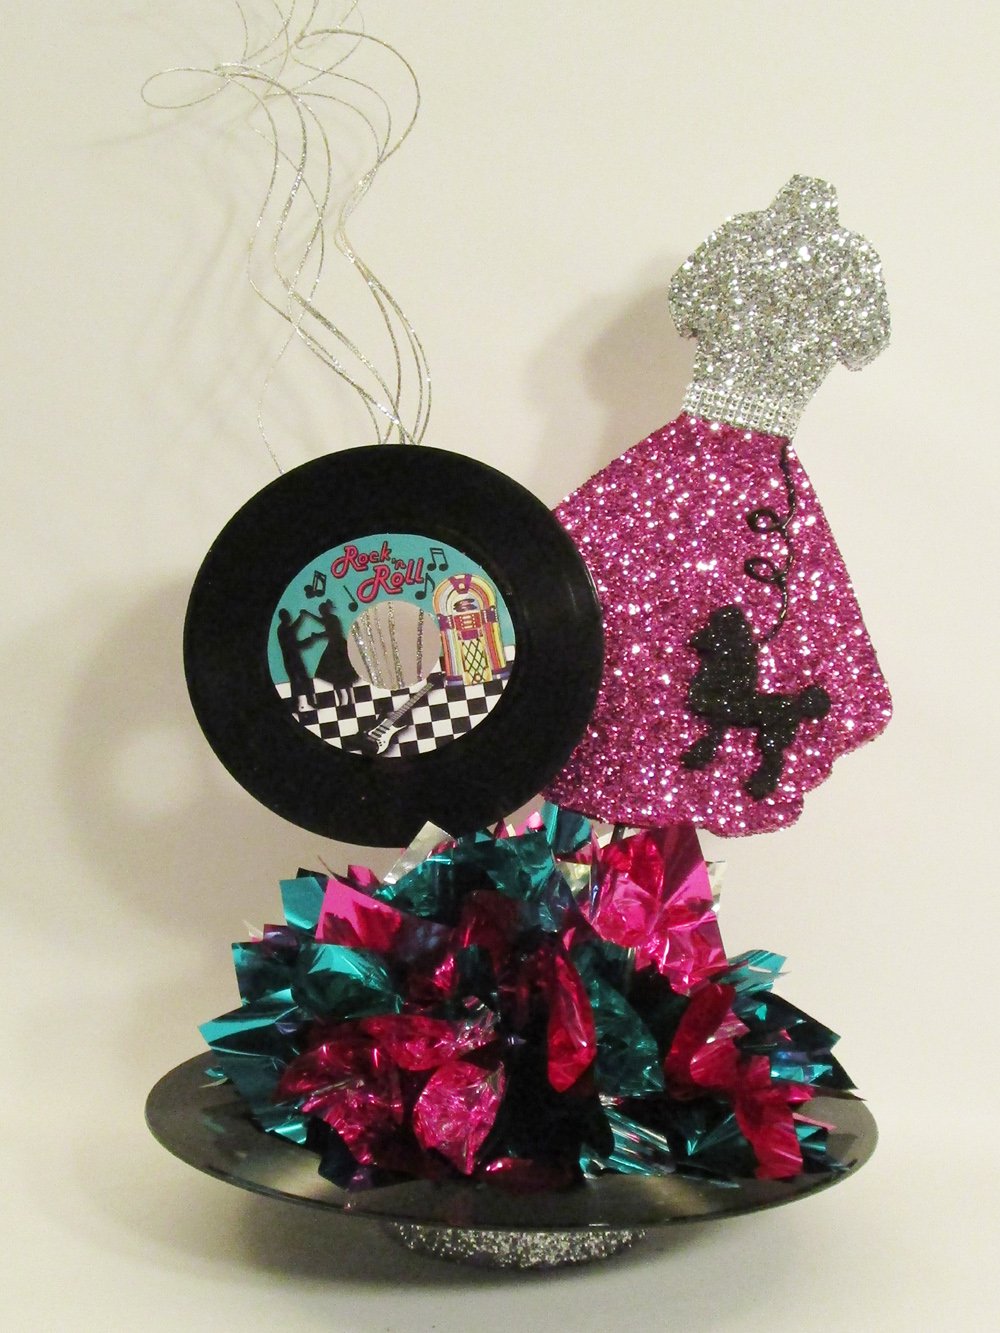 50's poodle skirt centerpiece - Designs by Ginny